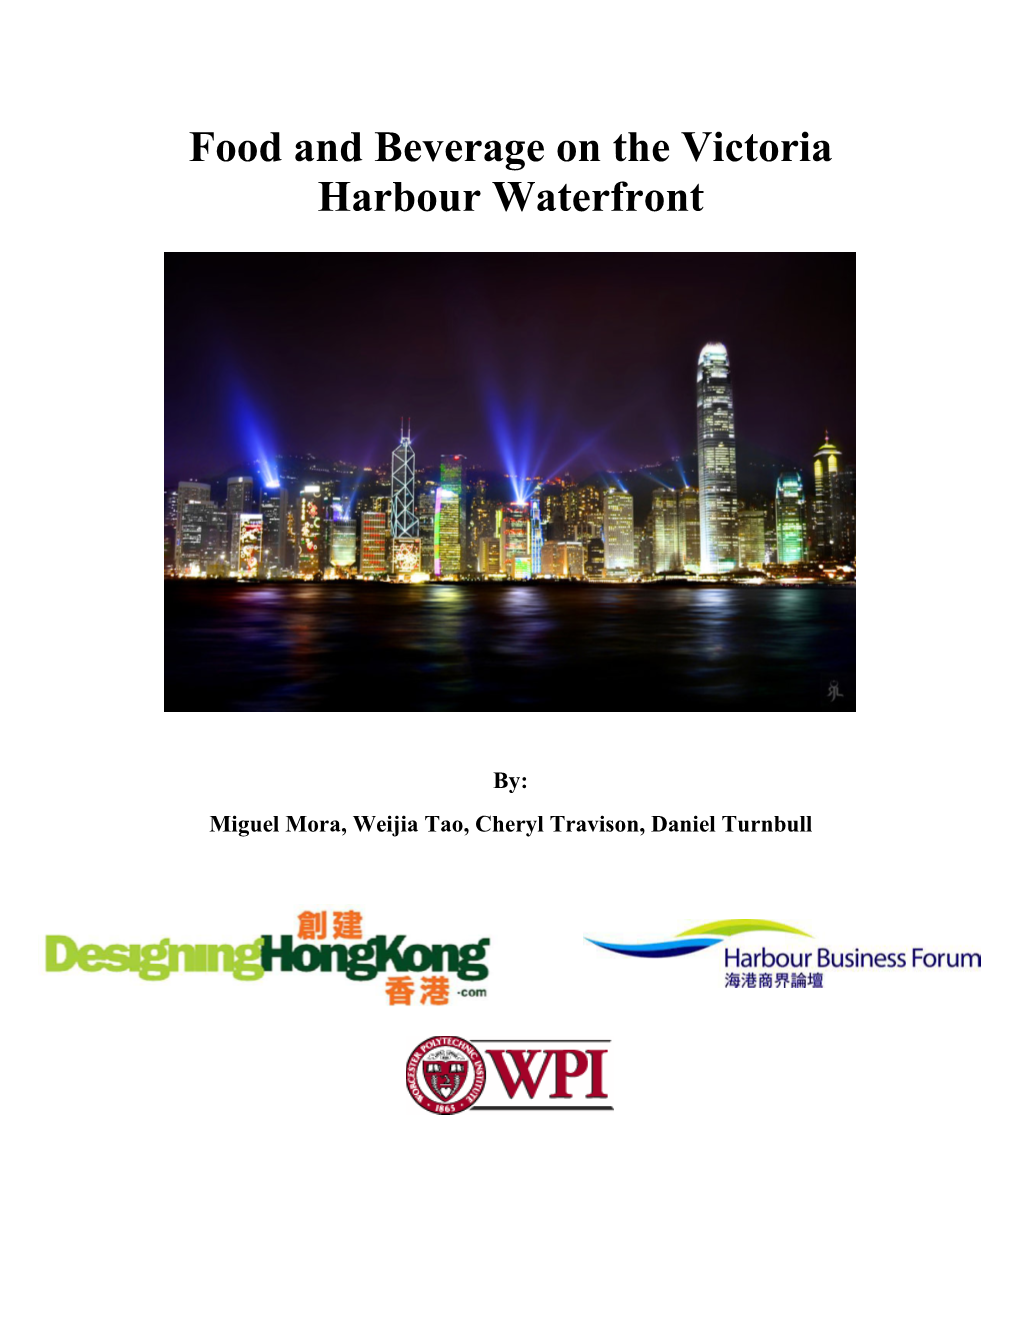 Food and Beverage on the Victoria Harbour Waterfront